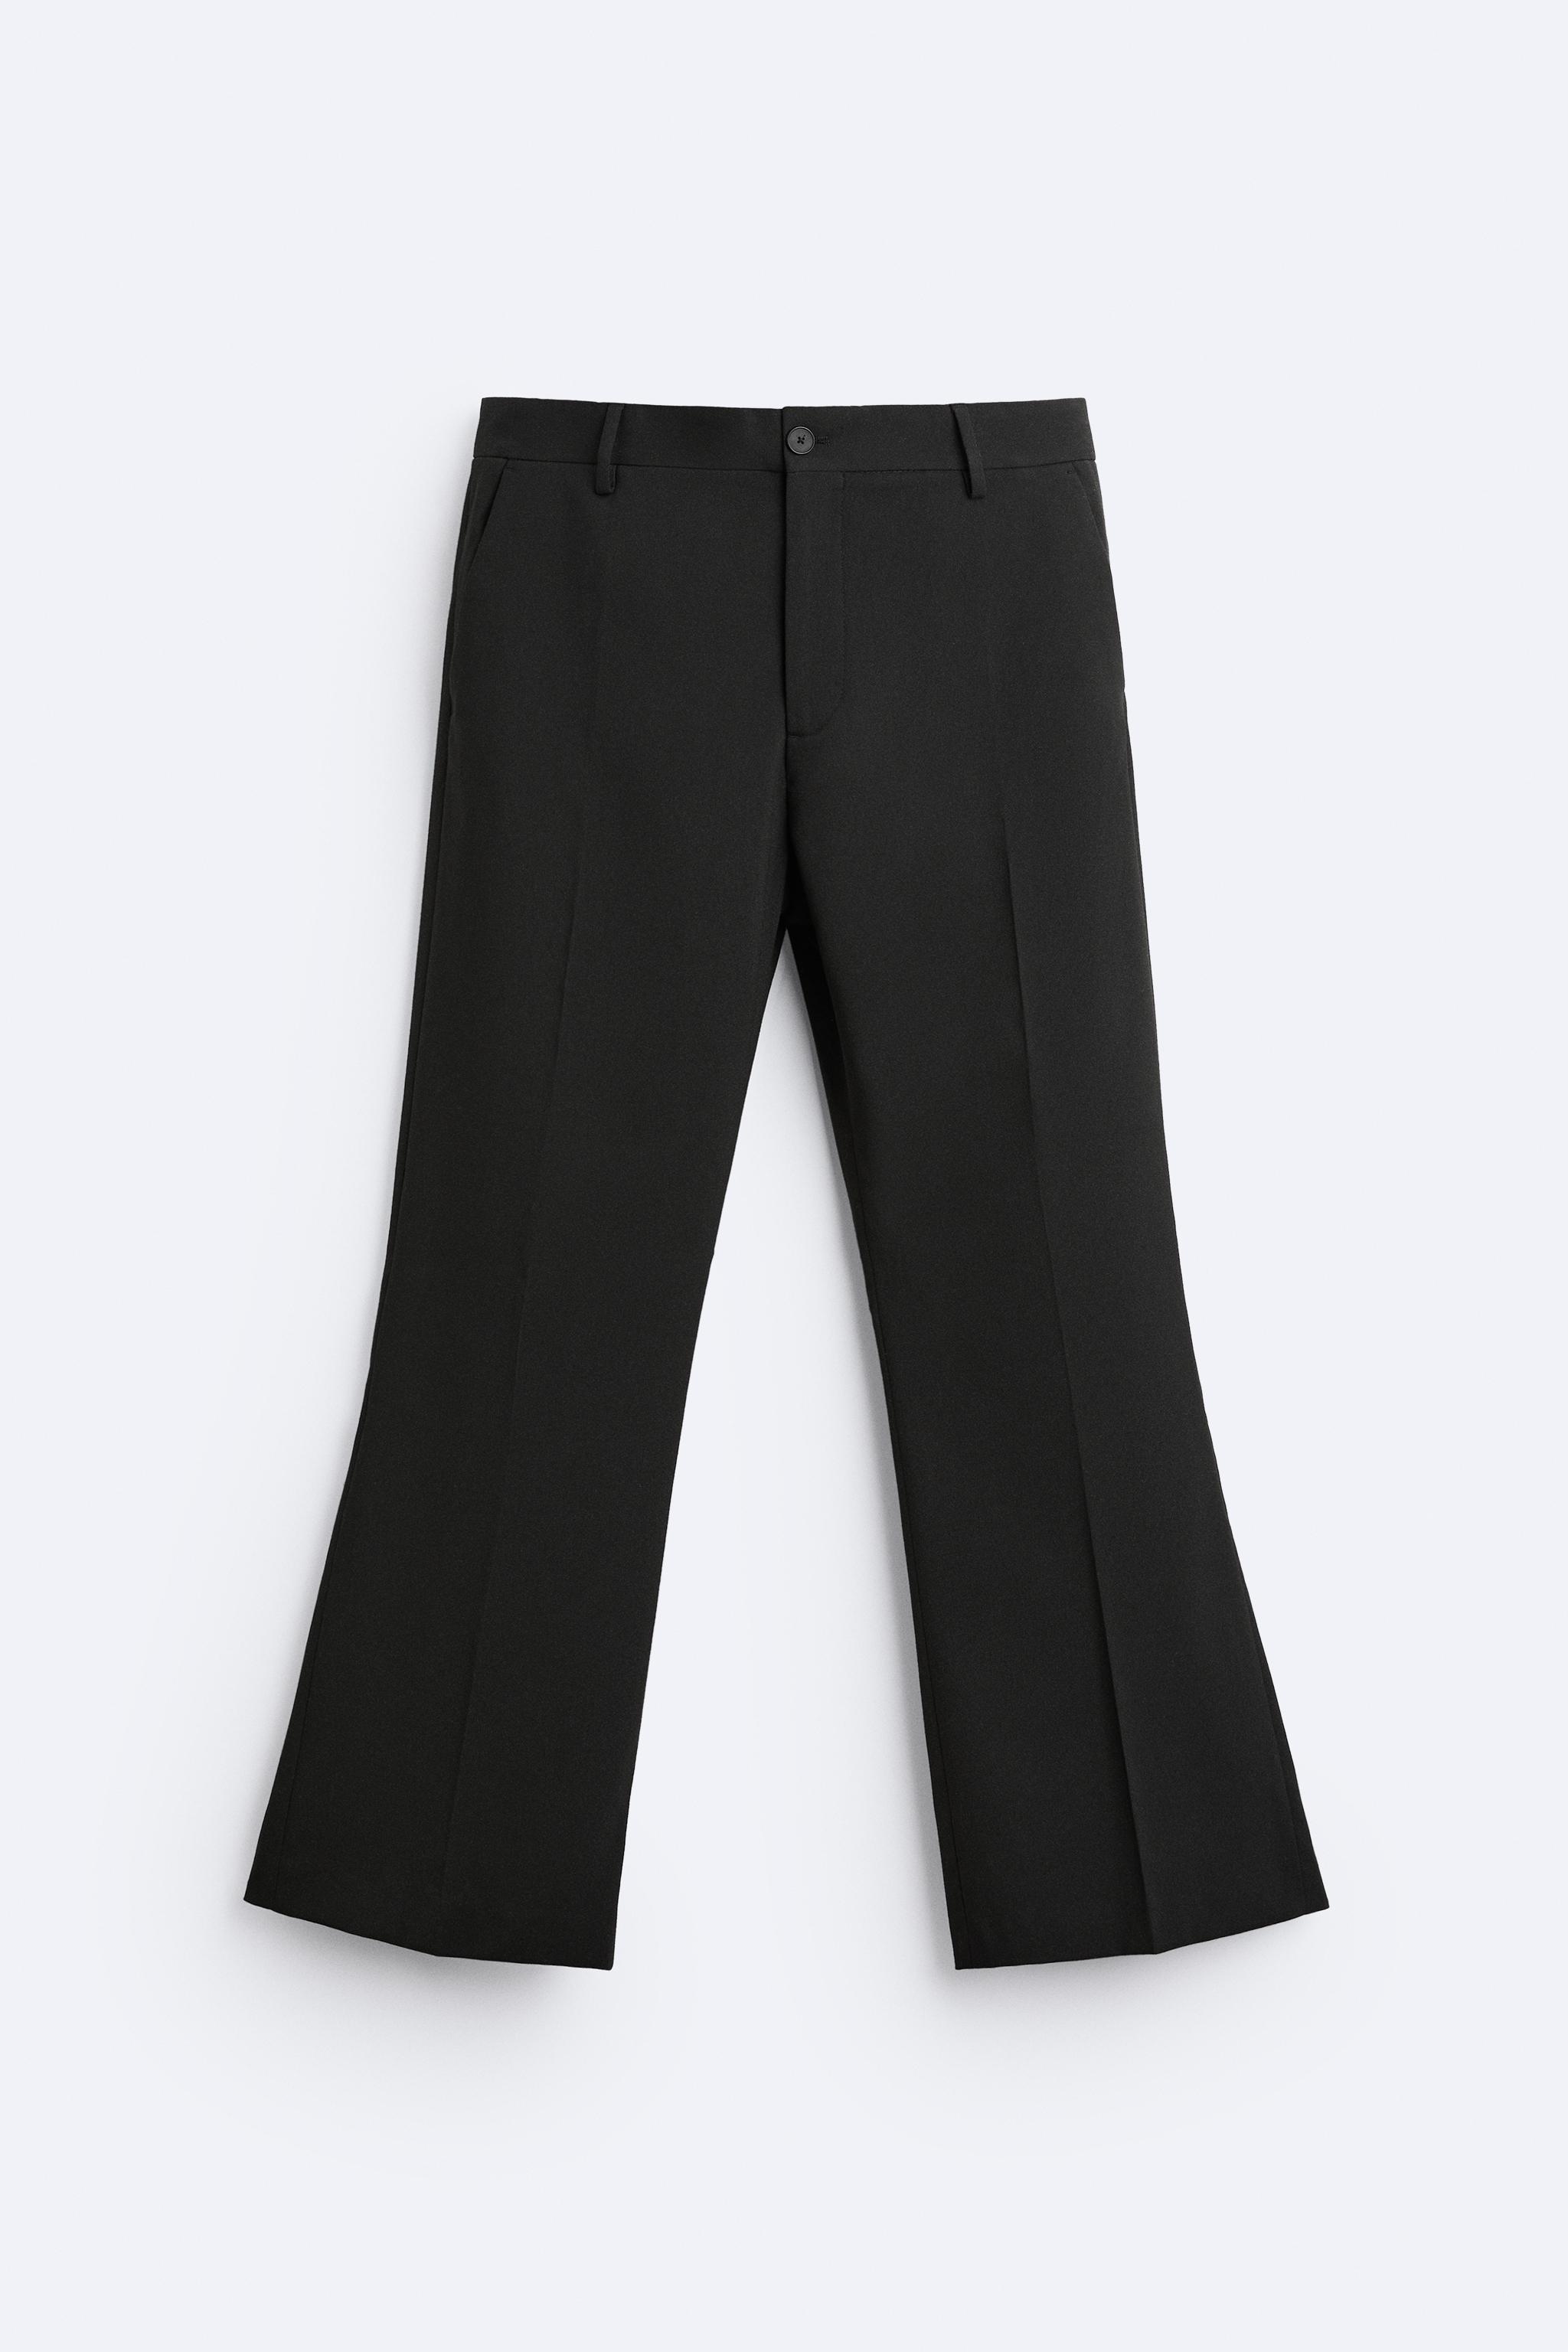 STRETCH SUIT PANTS - Green | ZARA United States